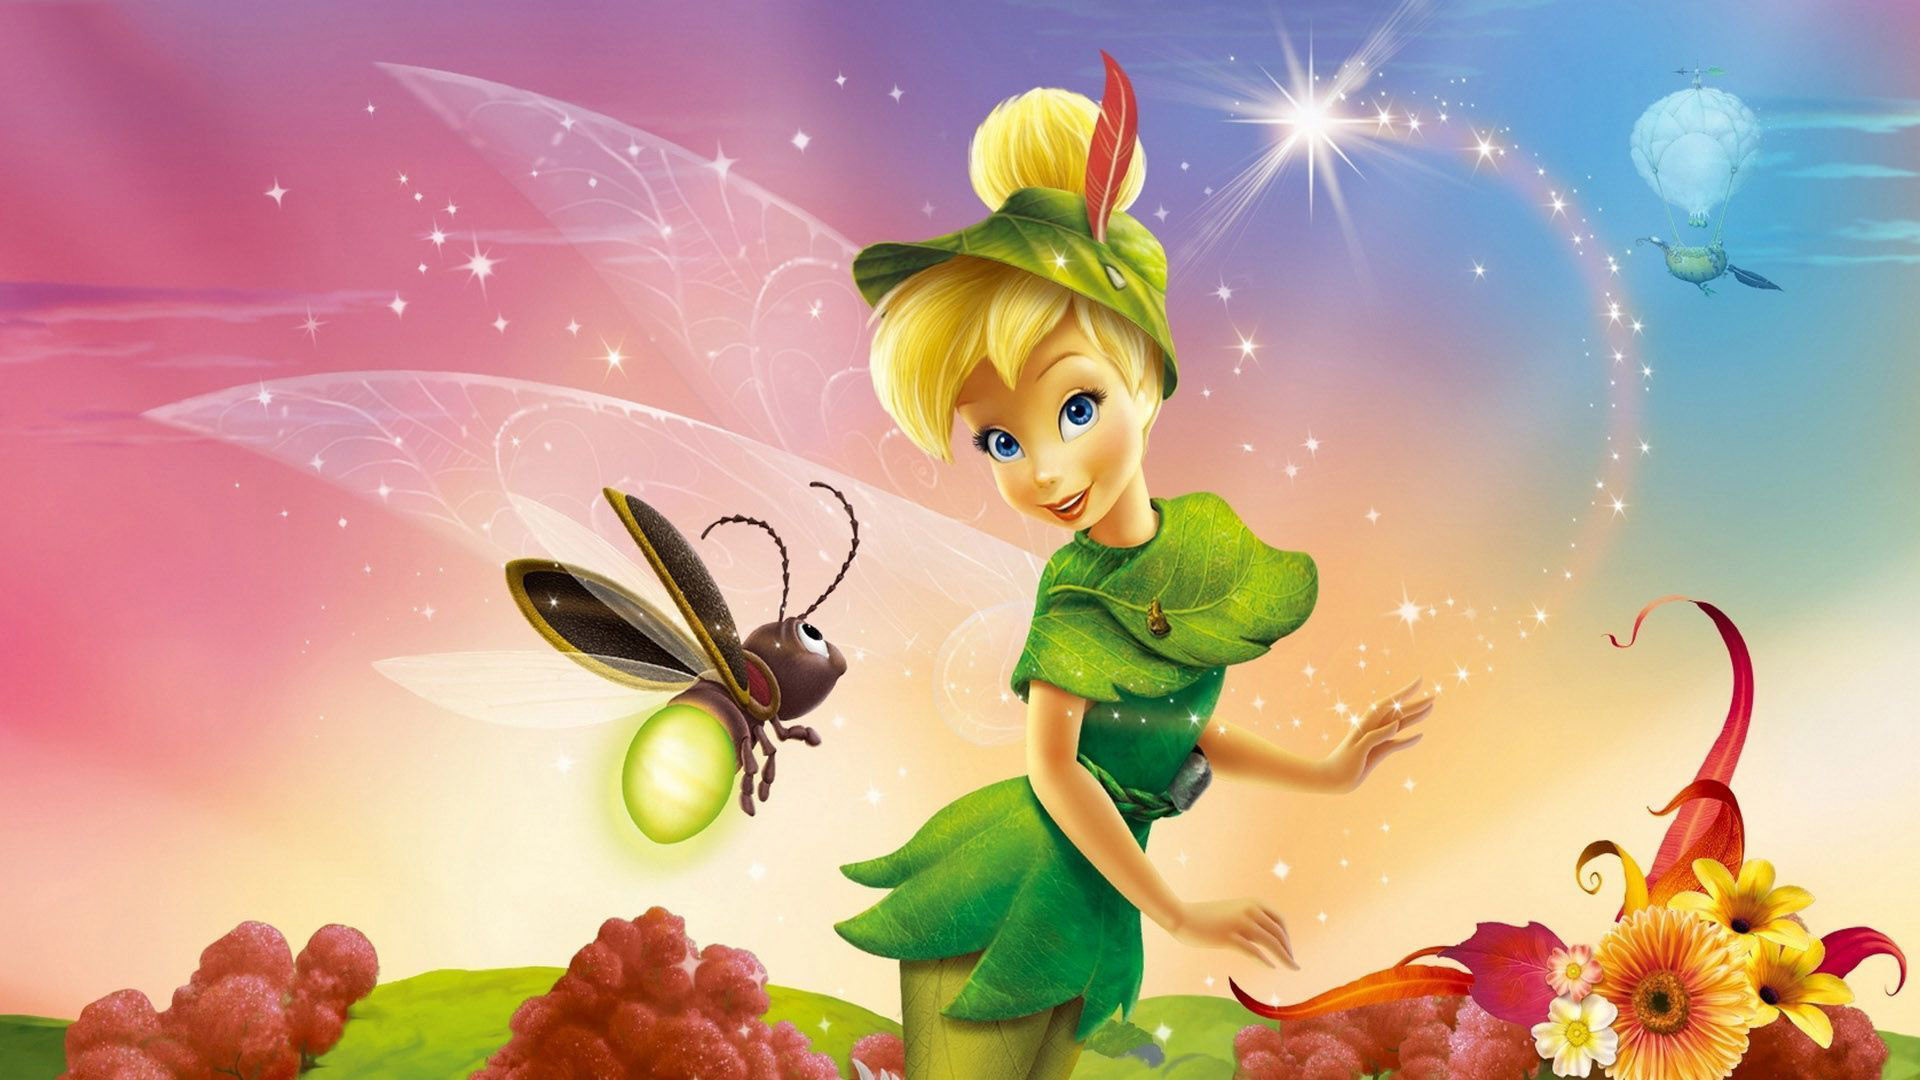 1920x1080 Find yourself a great Tinkerbell wallpaper with Disney fairies 1920Ã1080